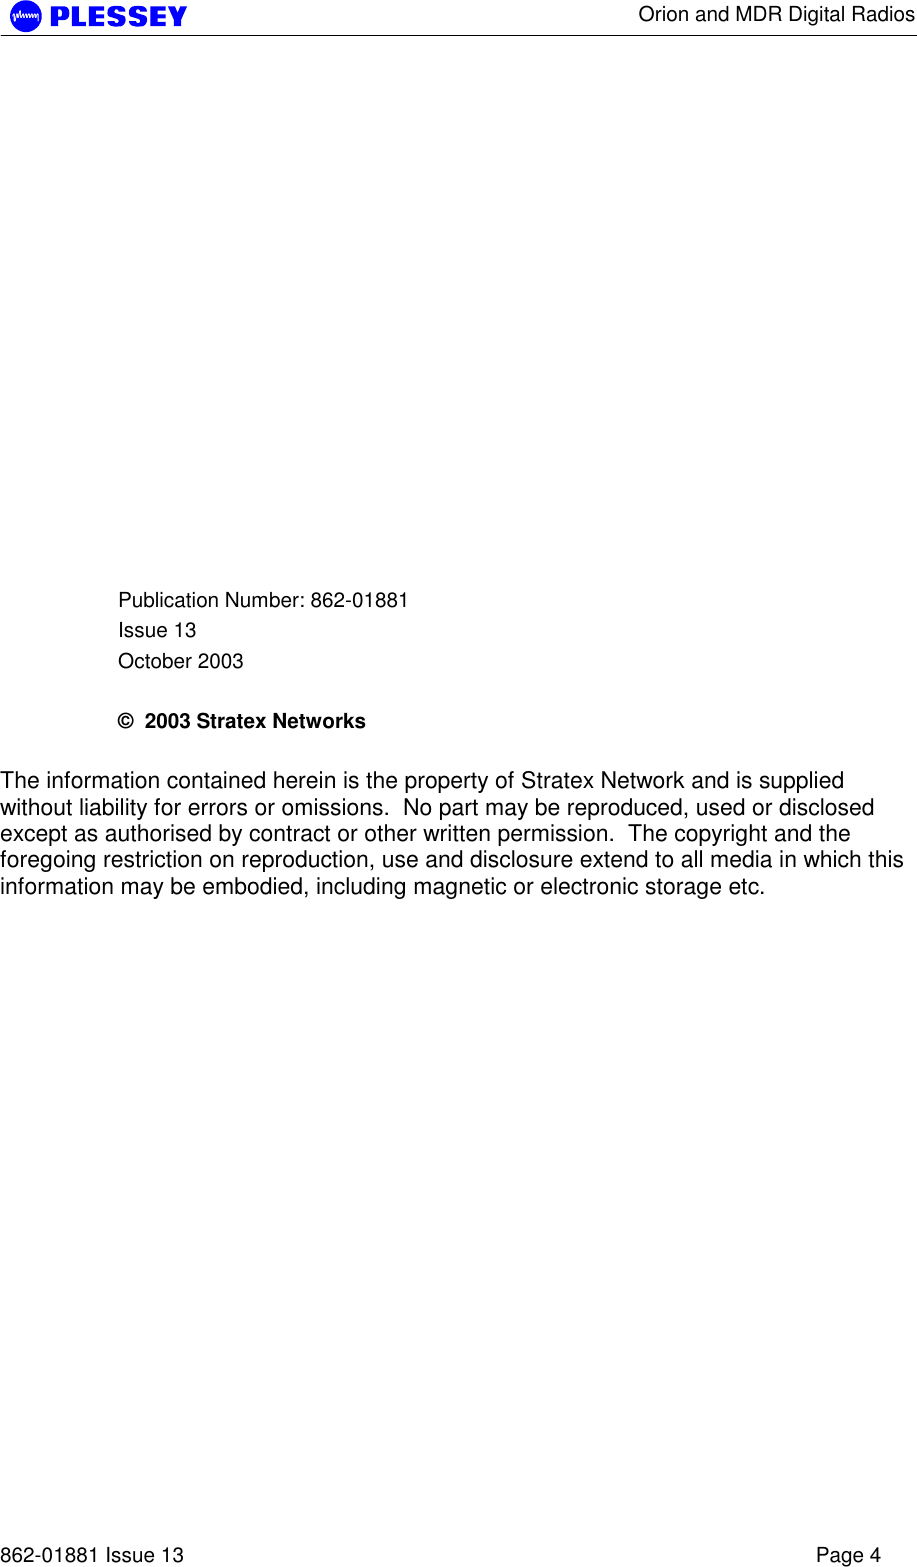      Orion and MDR Digital Radios   862-01881 Issue 13    Page 4              Publication Number: 862-01881 Issue 13 October 2003  ©  2003 Stratex Networks  The information contained herein is the property of Stratex Network and is supplied without liability for errors or omissions.  No part may be reproduced, used or disclosed except as authorised by contract or other written permission.  The copyright and the foregoing restriction on reproduction, use and disclosure extend to all media in which this information may be embodied, including magnetic or electronic storage etc.  